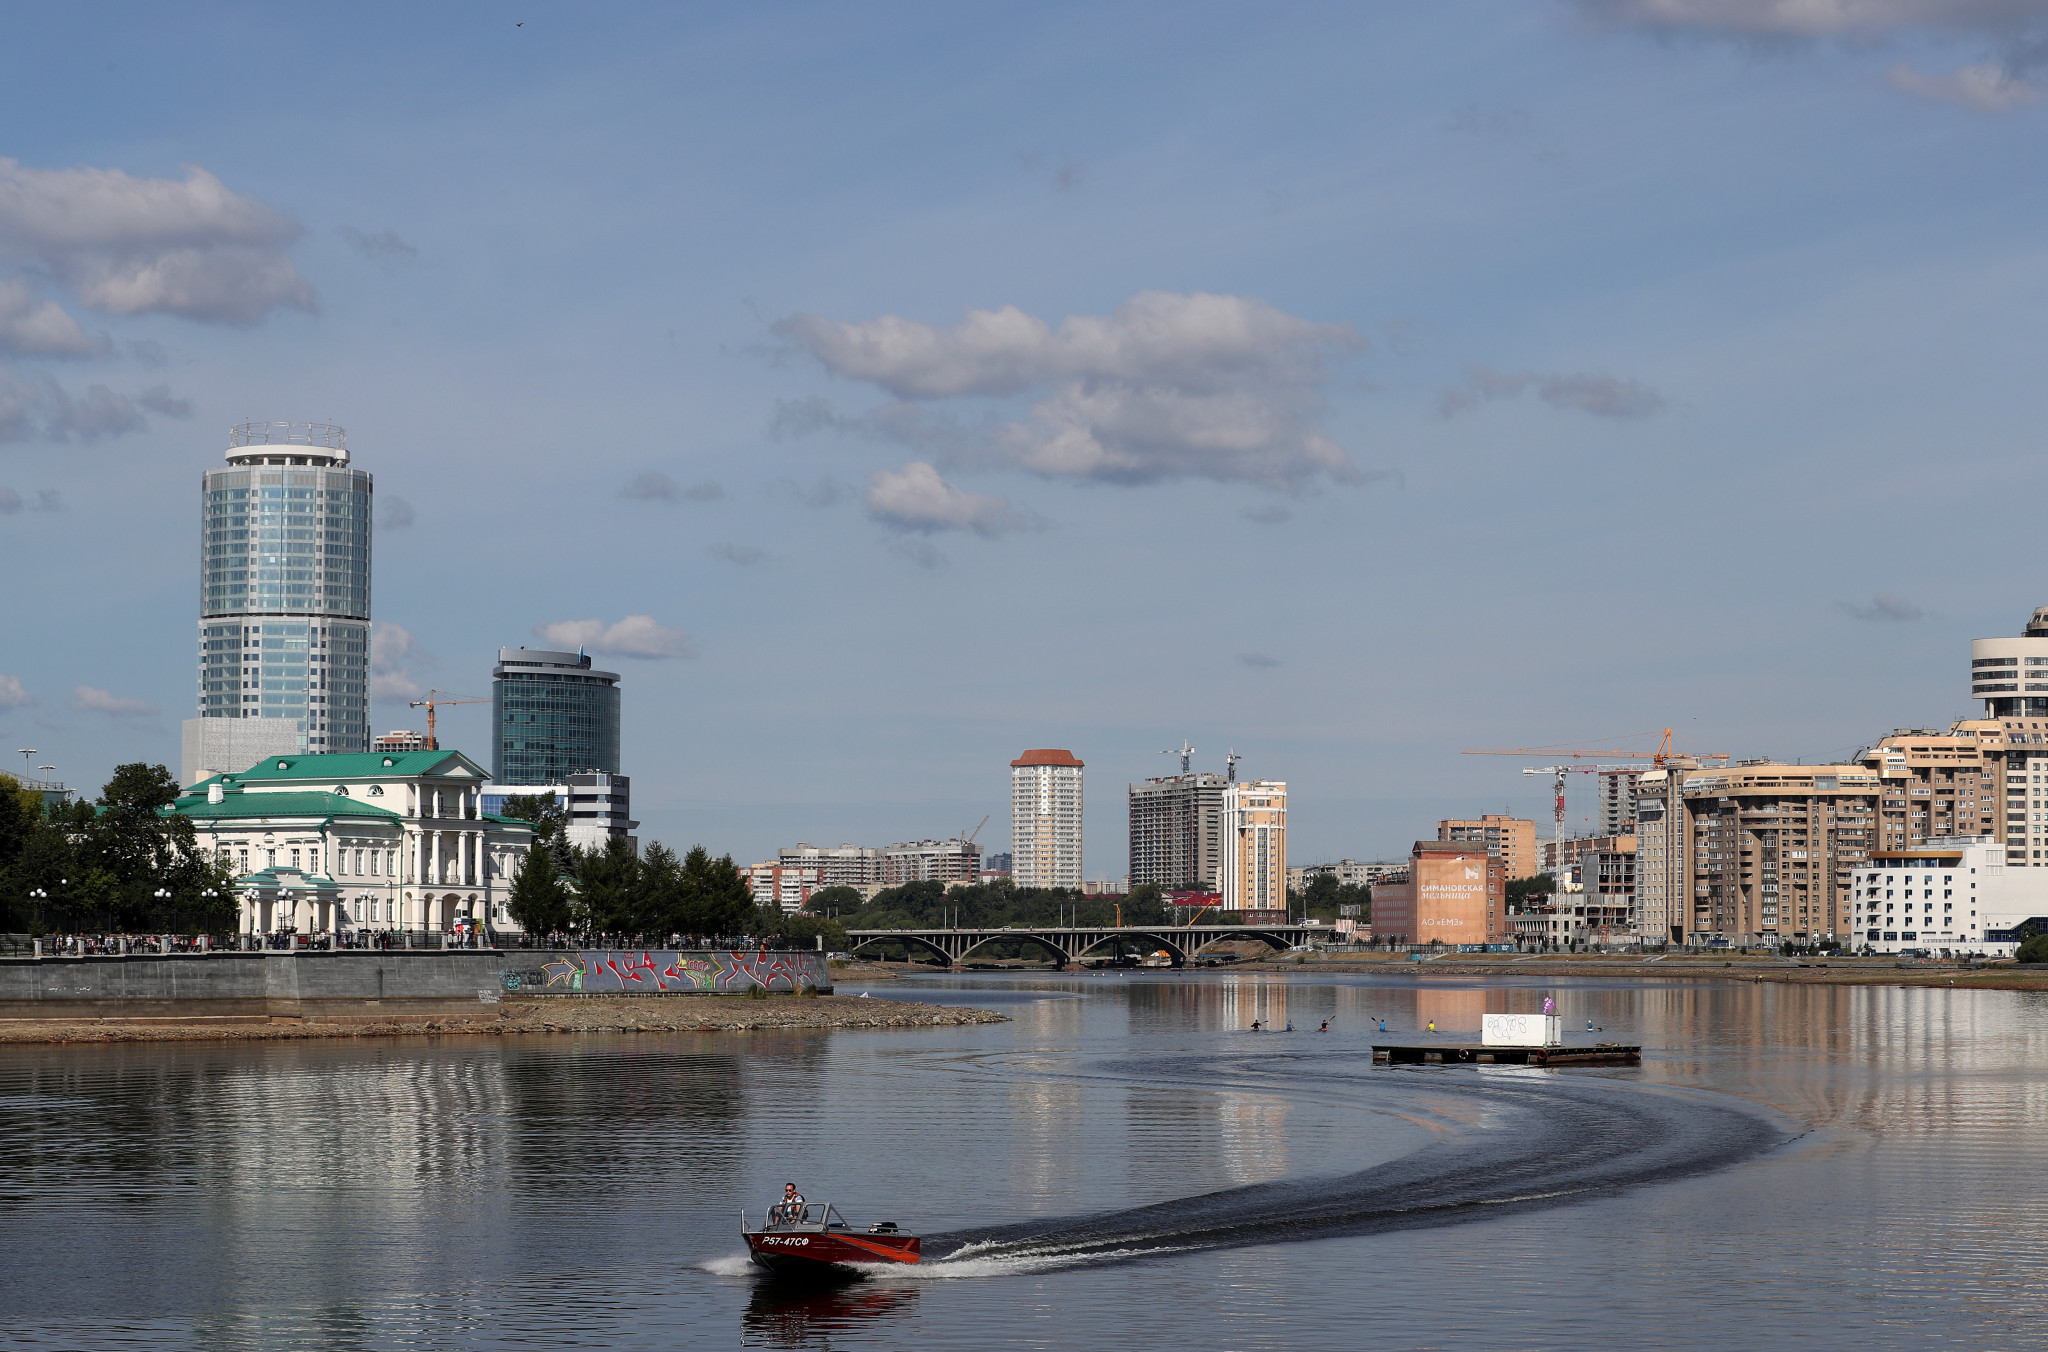 Yekaterinburg has replaced Sochi as the host city for this year's AIBA Men's World Championships ©Getty Images